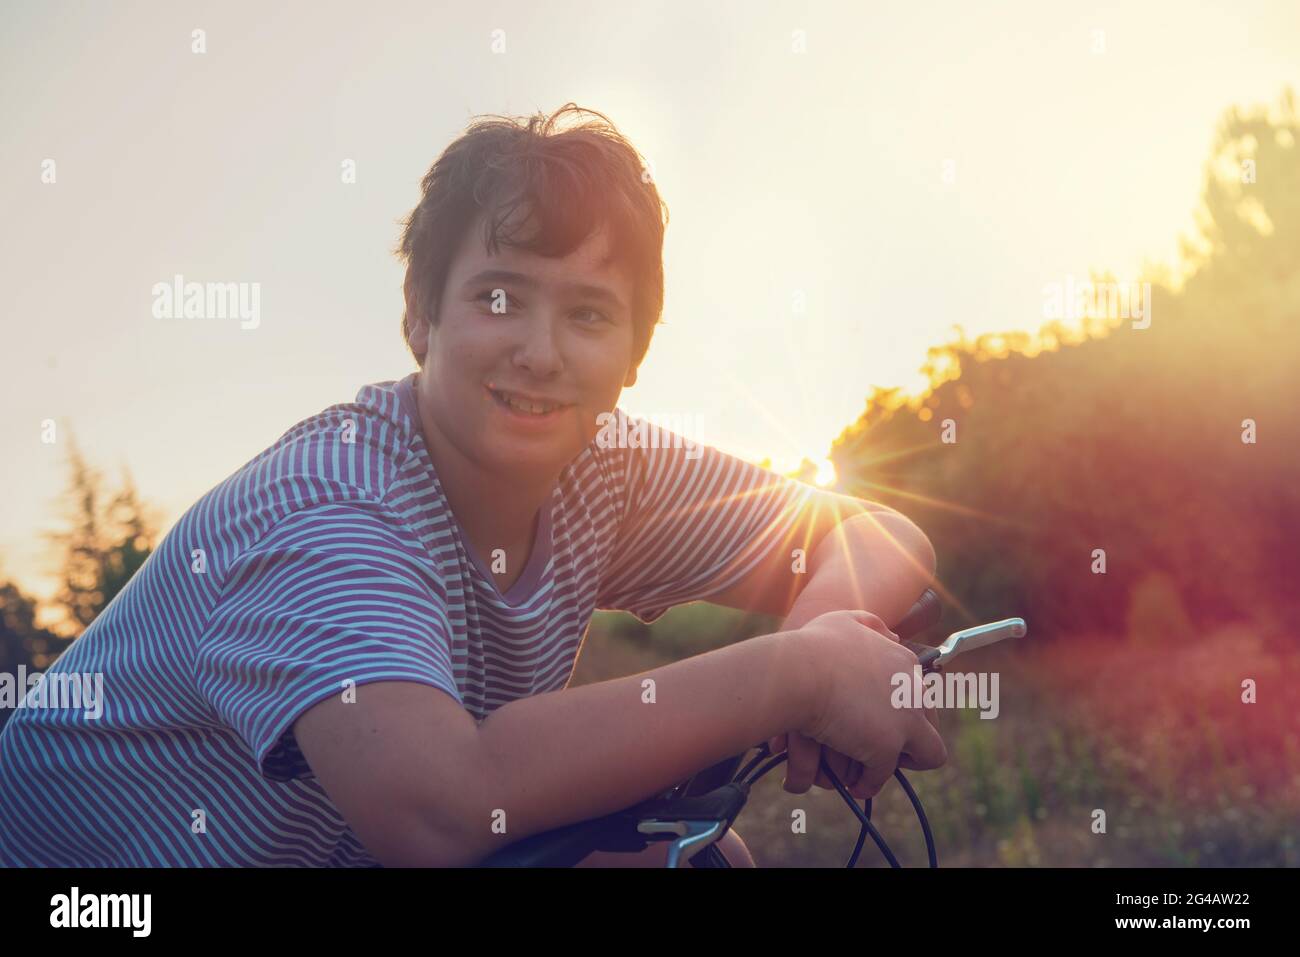 Happy boy posing in a bicycle outdoors at sunset Stock Photo